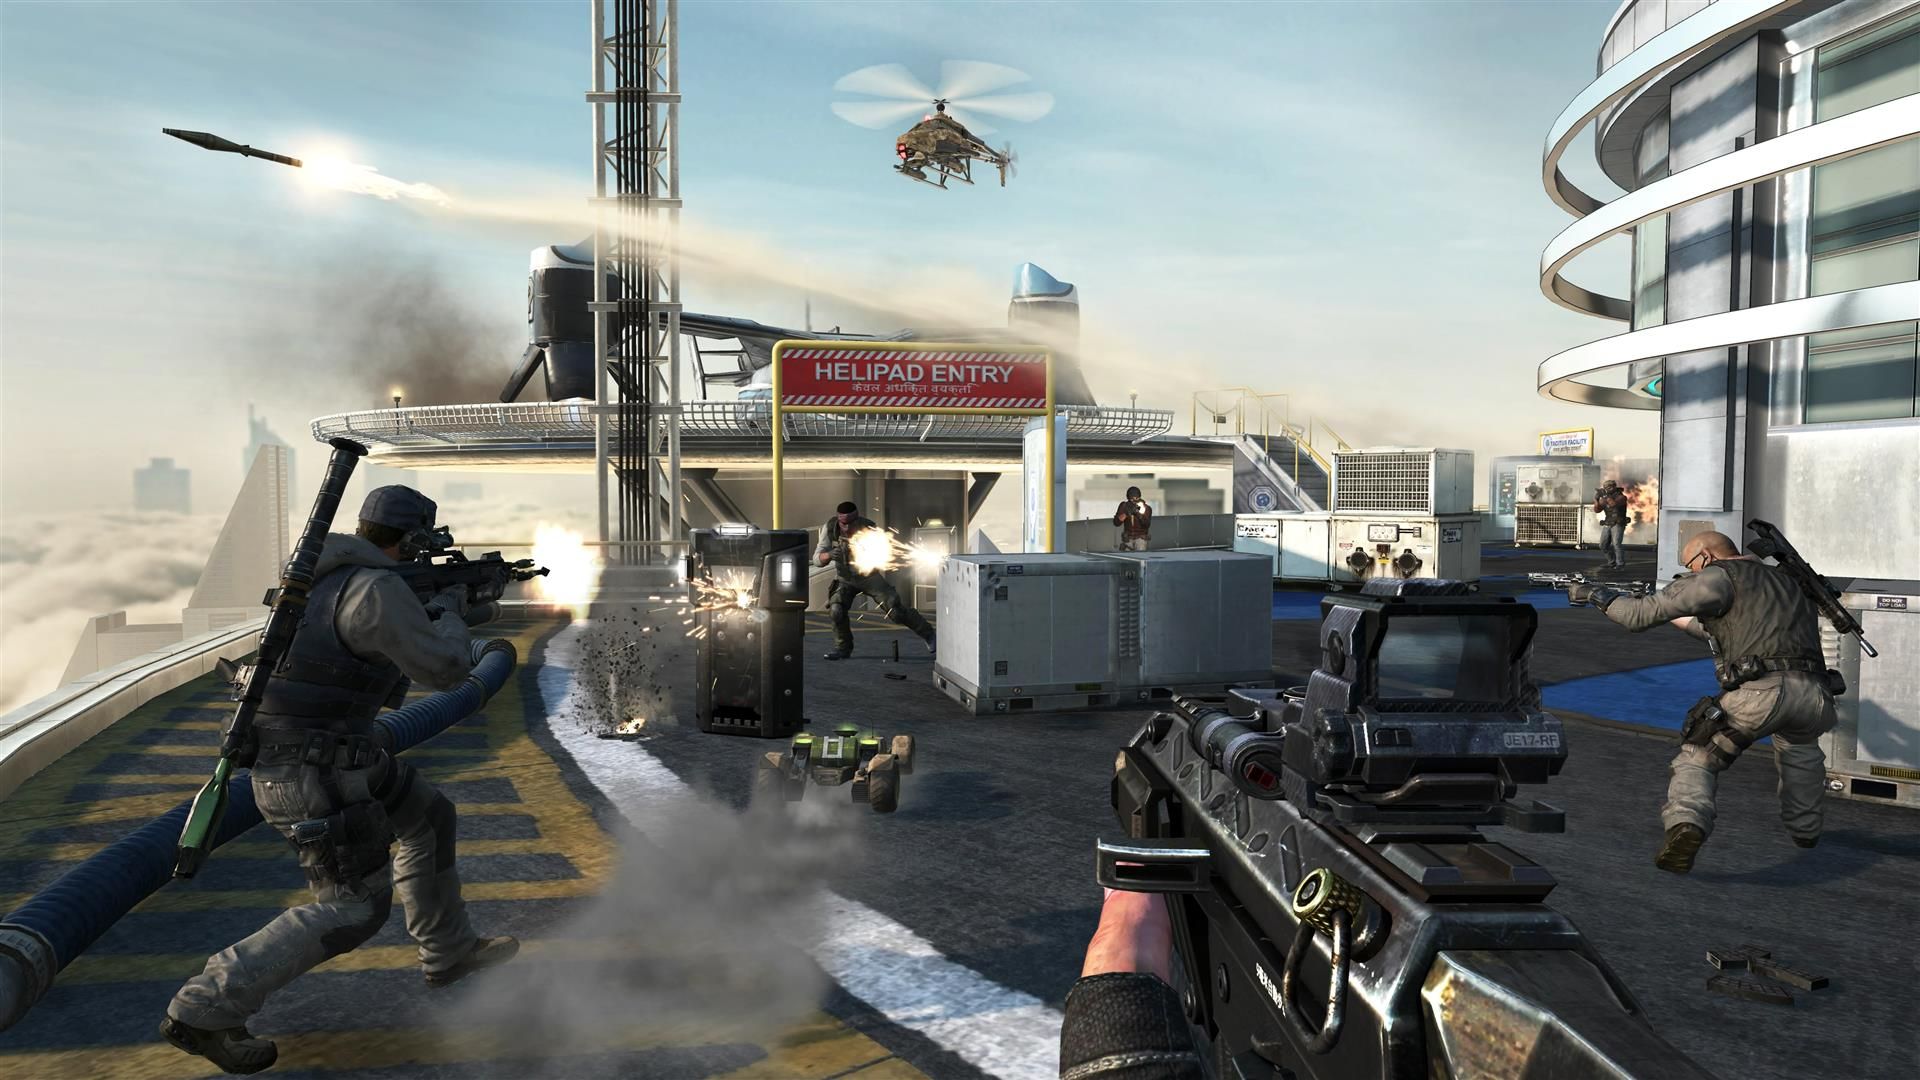 Black Ops 2 adds new mode Arms Race Team Deathmatch, plus a number